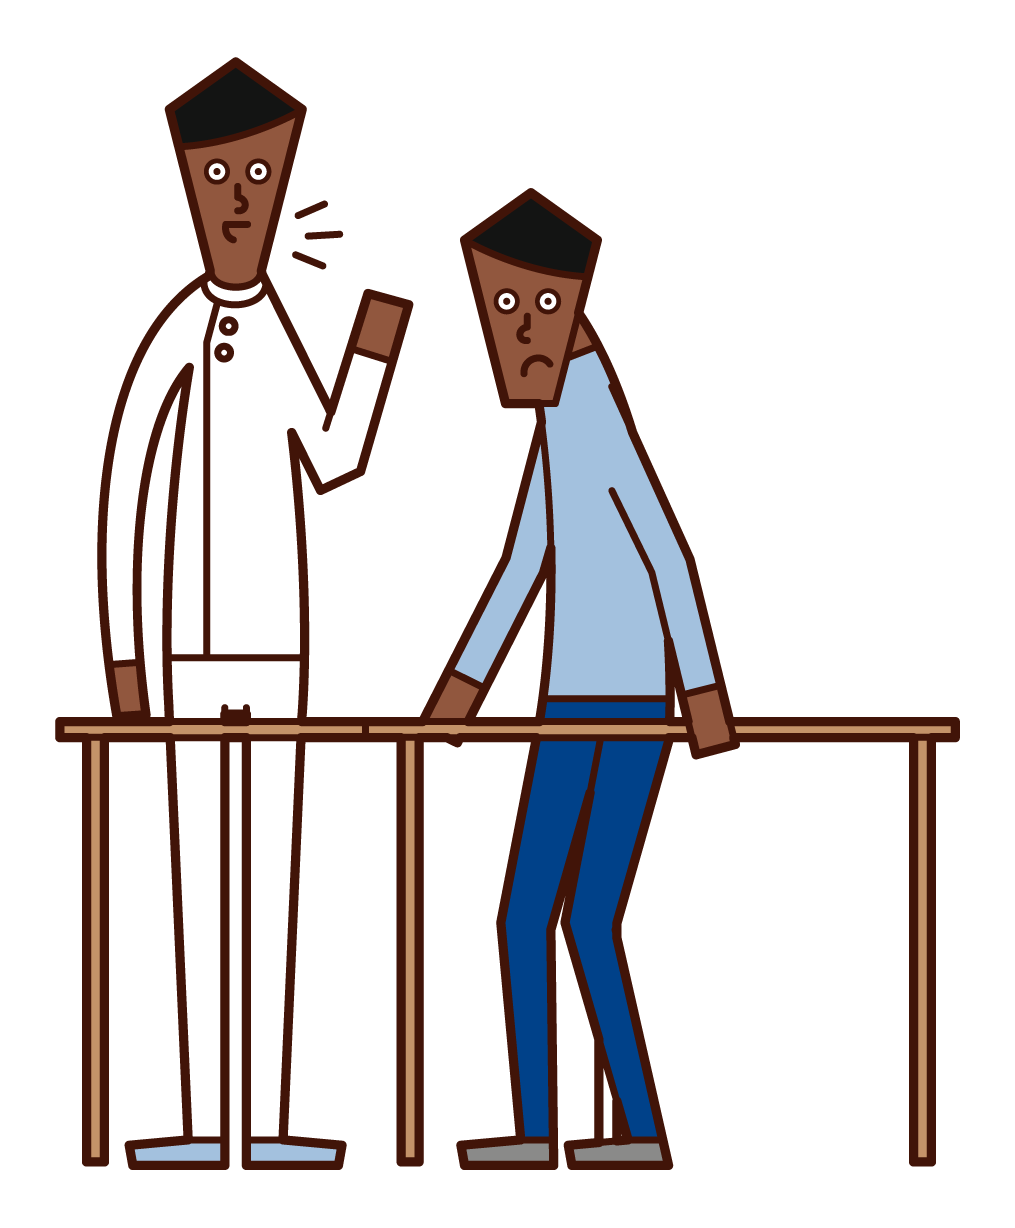 Illustration of a person (male) who is rehabilitation